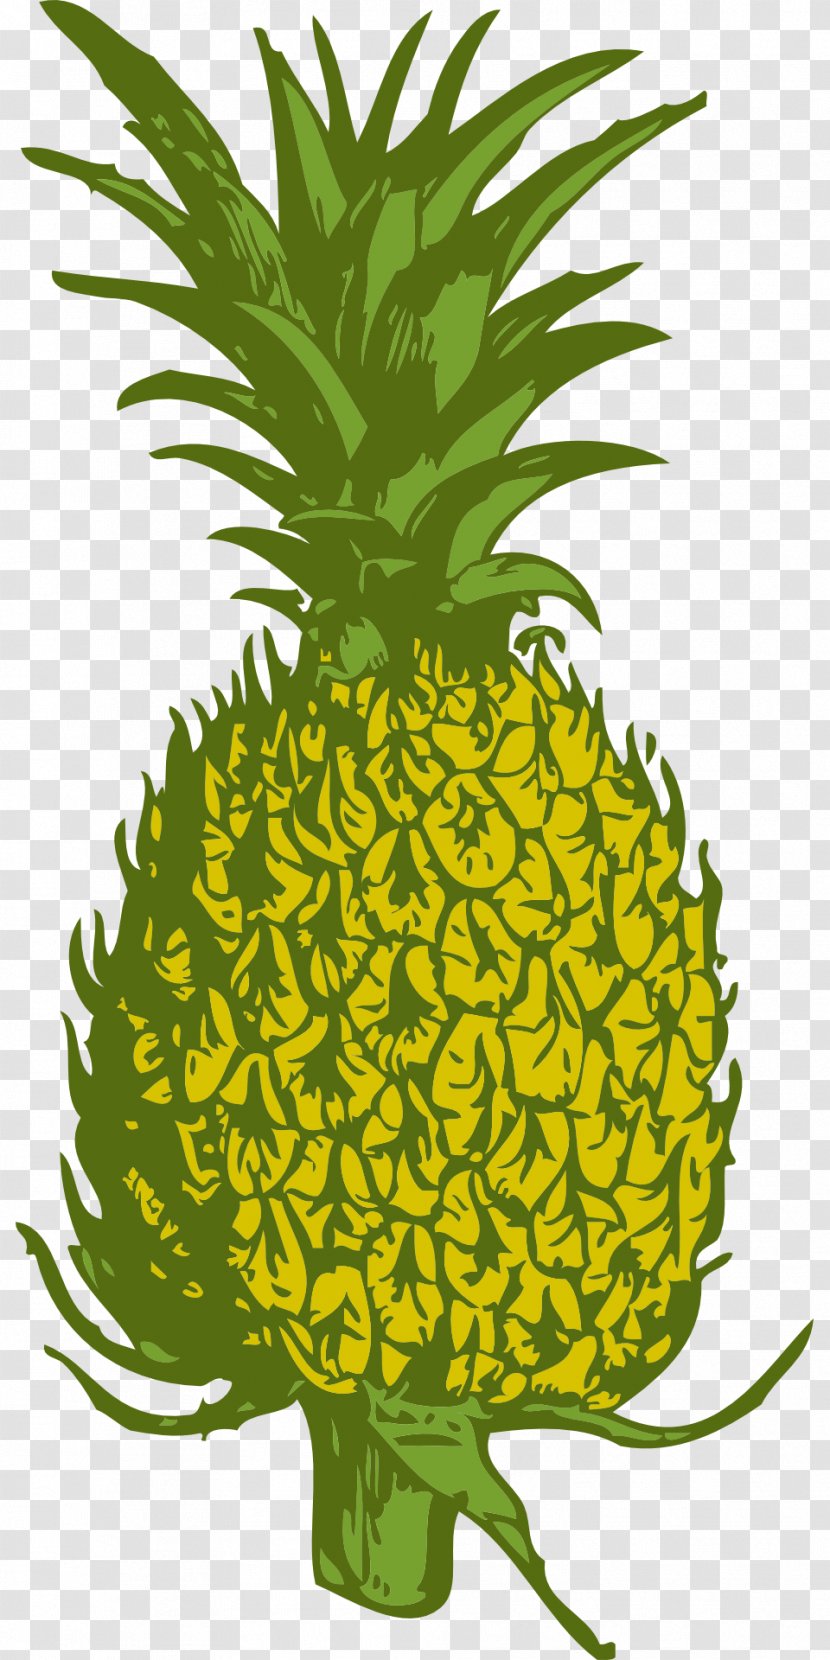 Vector Graphics Clip Art Image Illustration - Pineapple - Amine Transparent PNG